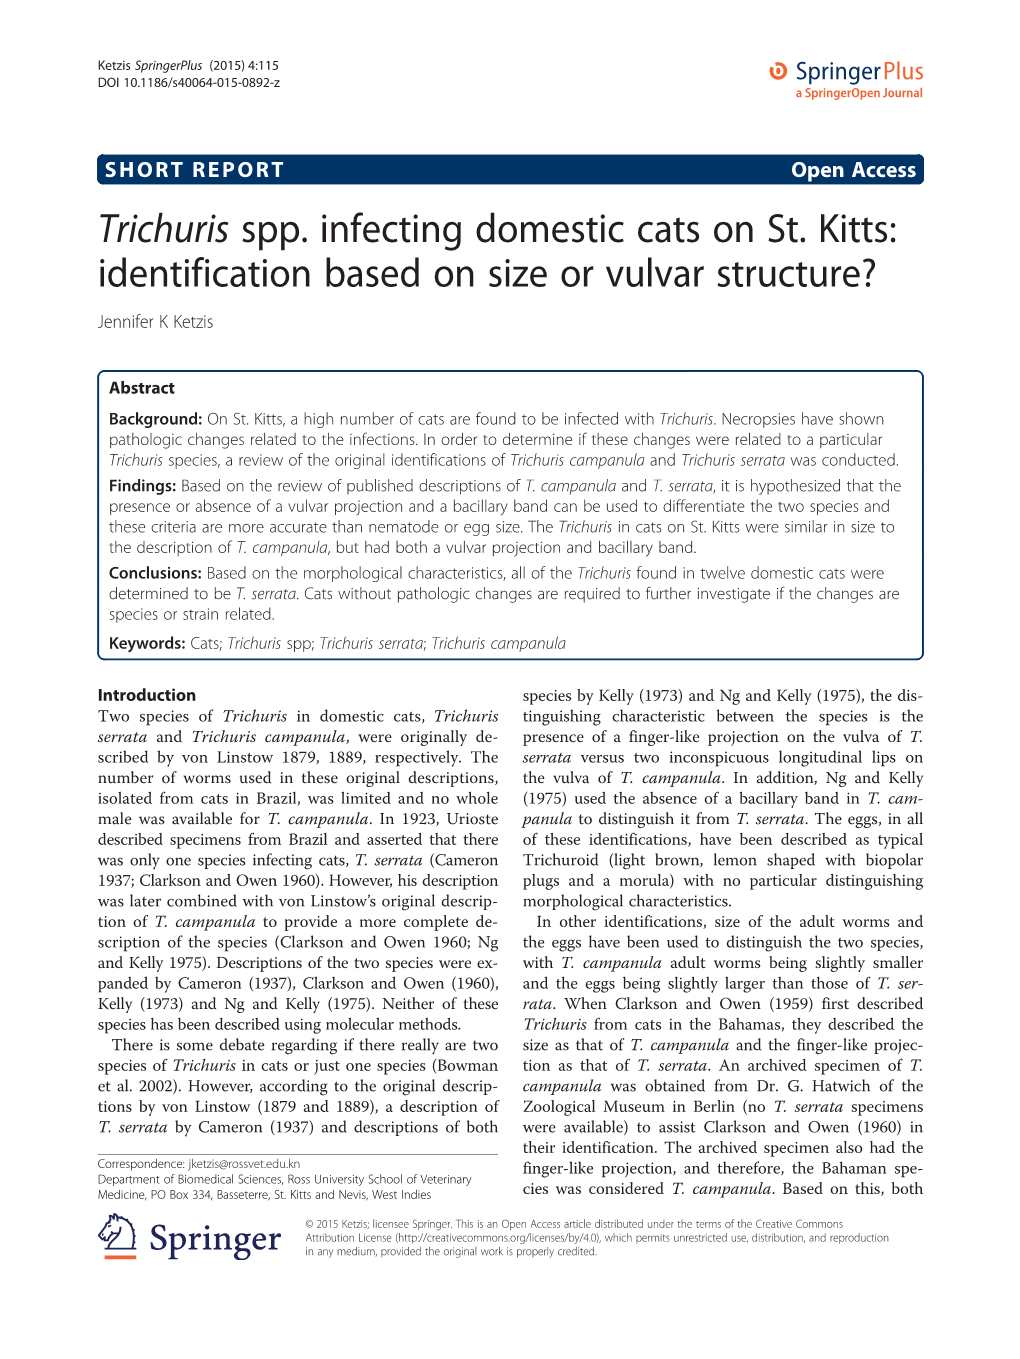 Trichuris Spp. Infecting Domestic Cats on St. Kitts: Identification Based on Size Or Vulvar Structure? Jennifer K Ketzis